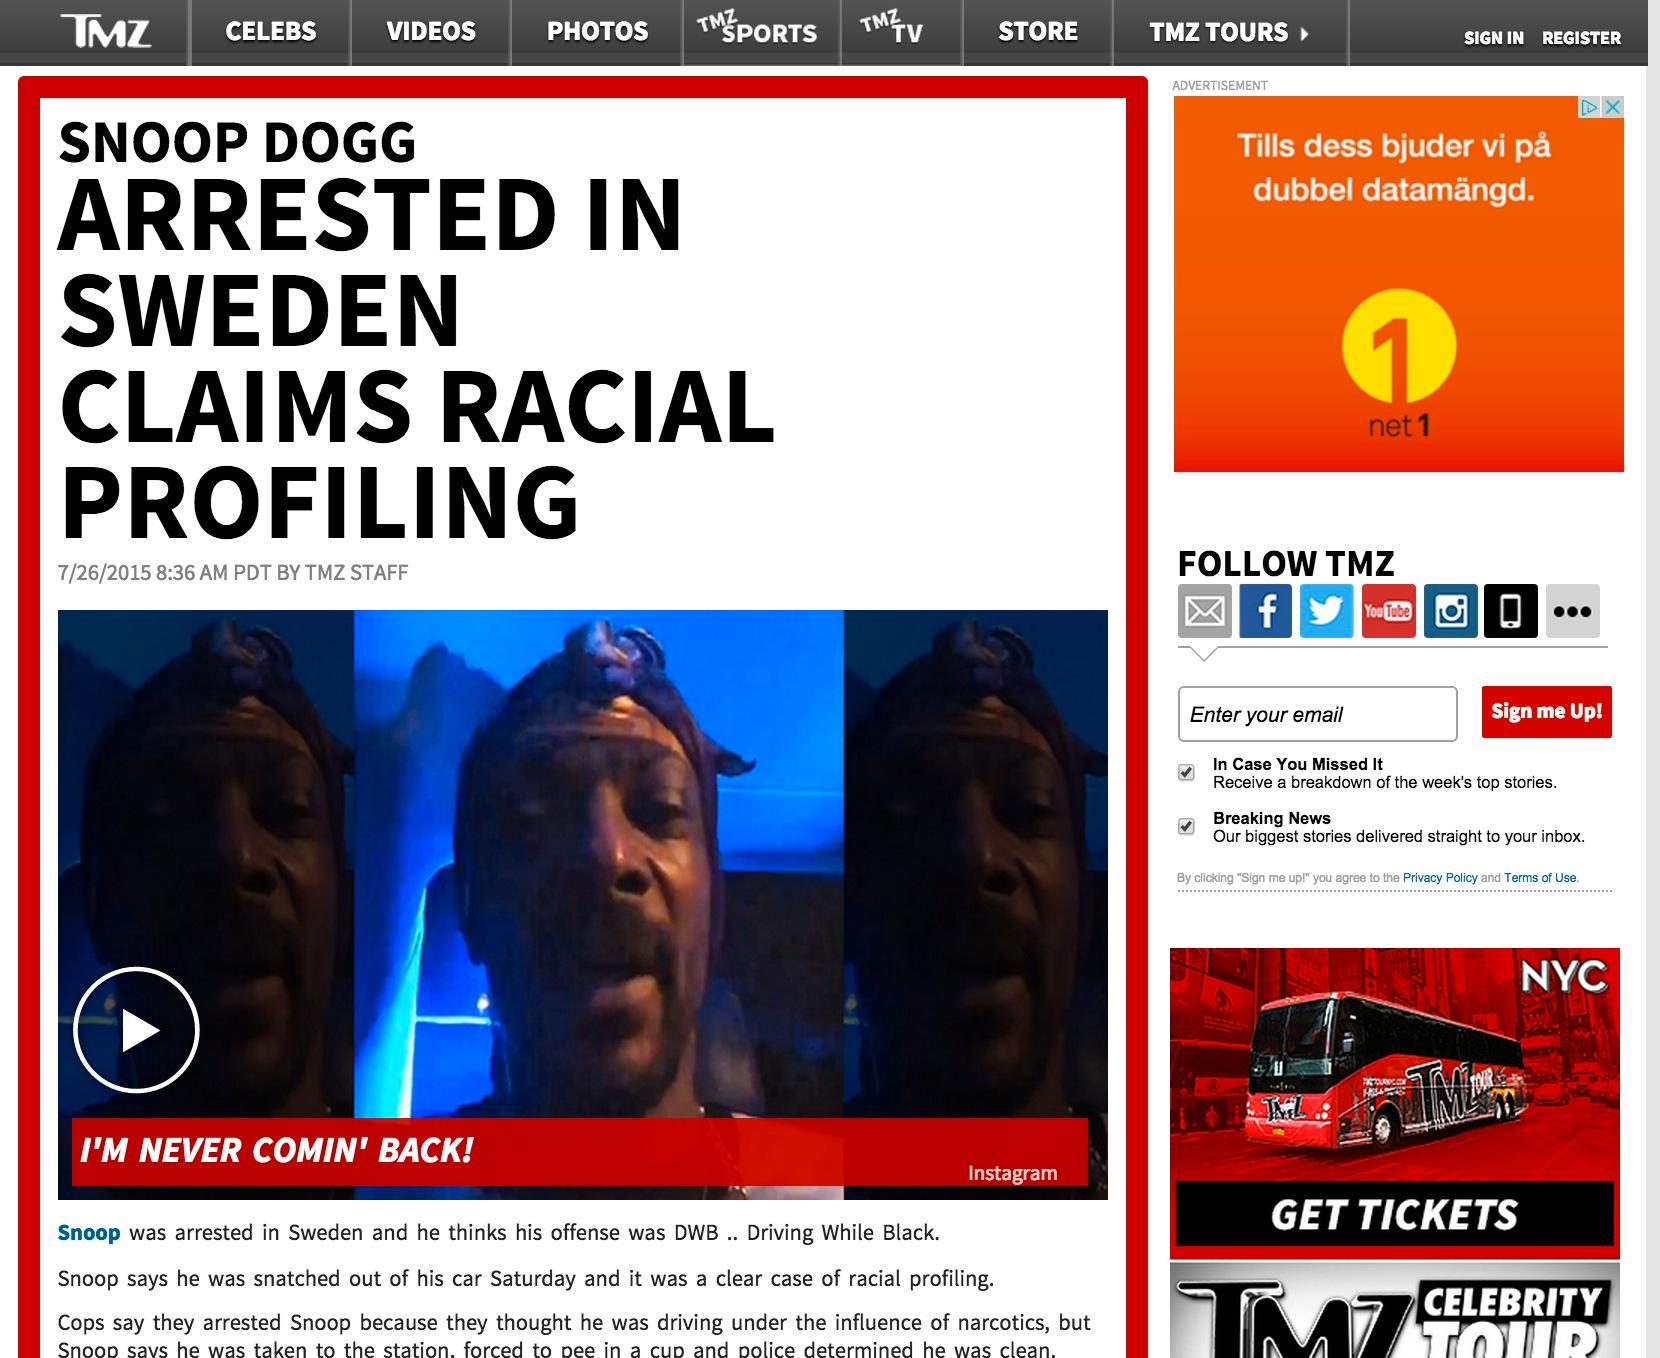 TMZ Snoop Dogg Arrested in Sweden Claims Racial Profiling
A police spokesman tells TMZ, Snoop's not in the clear.  He says Snoop showed signs of driving under the influence and it will take 2 weeks to get the test results back.  As for Snoops allegation of racial profiling, the spokesman said, "We don't work like that in Sweden."